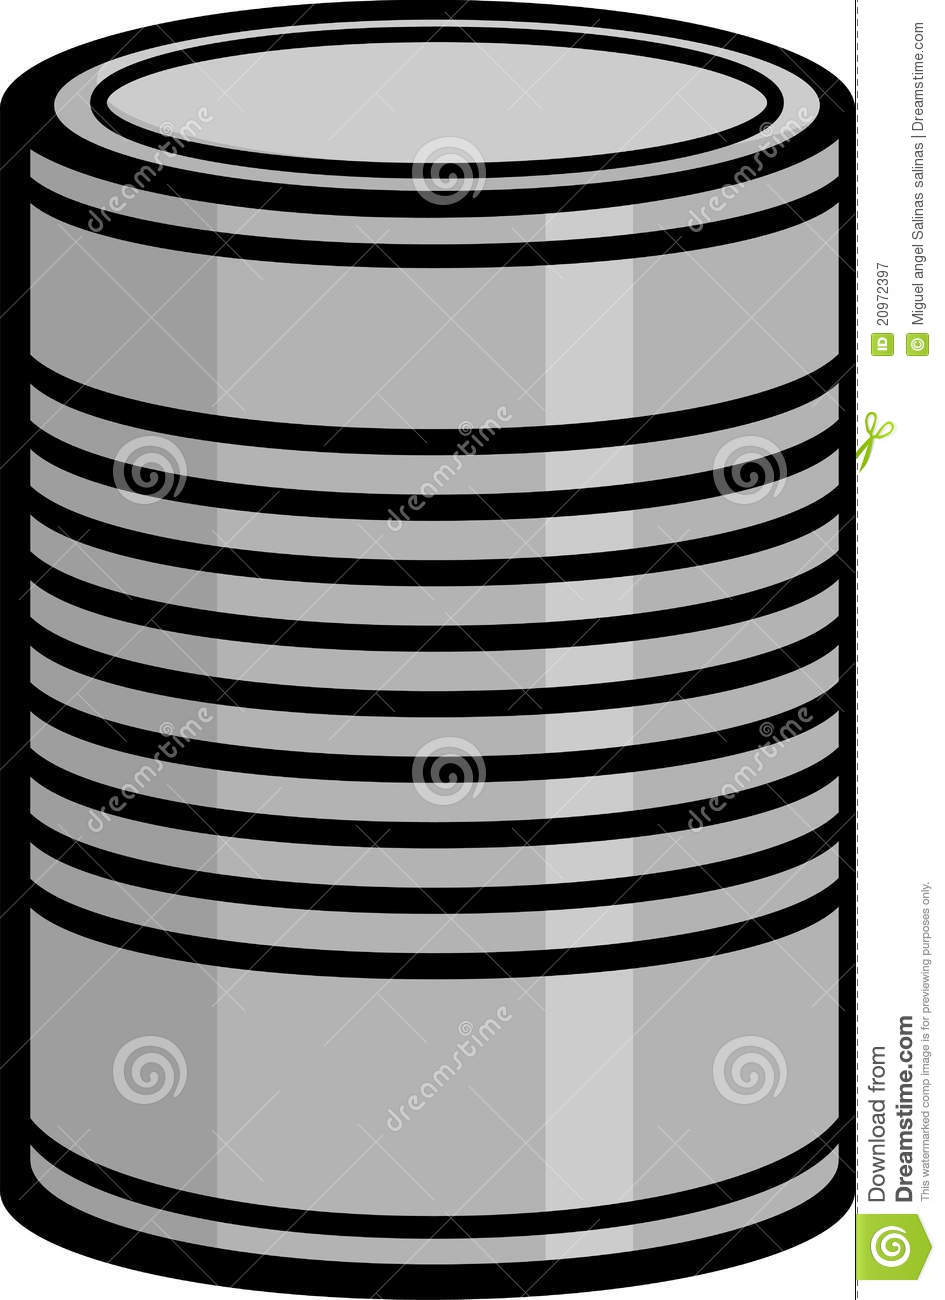 Tin Can Lid Clipart   Cliparthut   Free Clipart